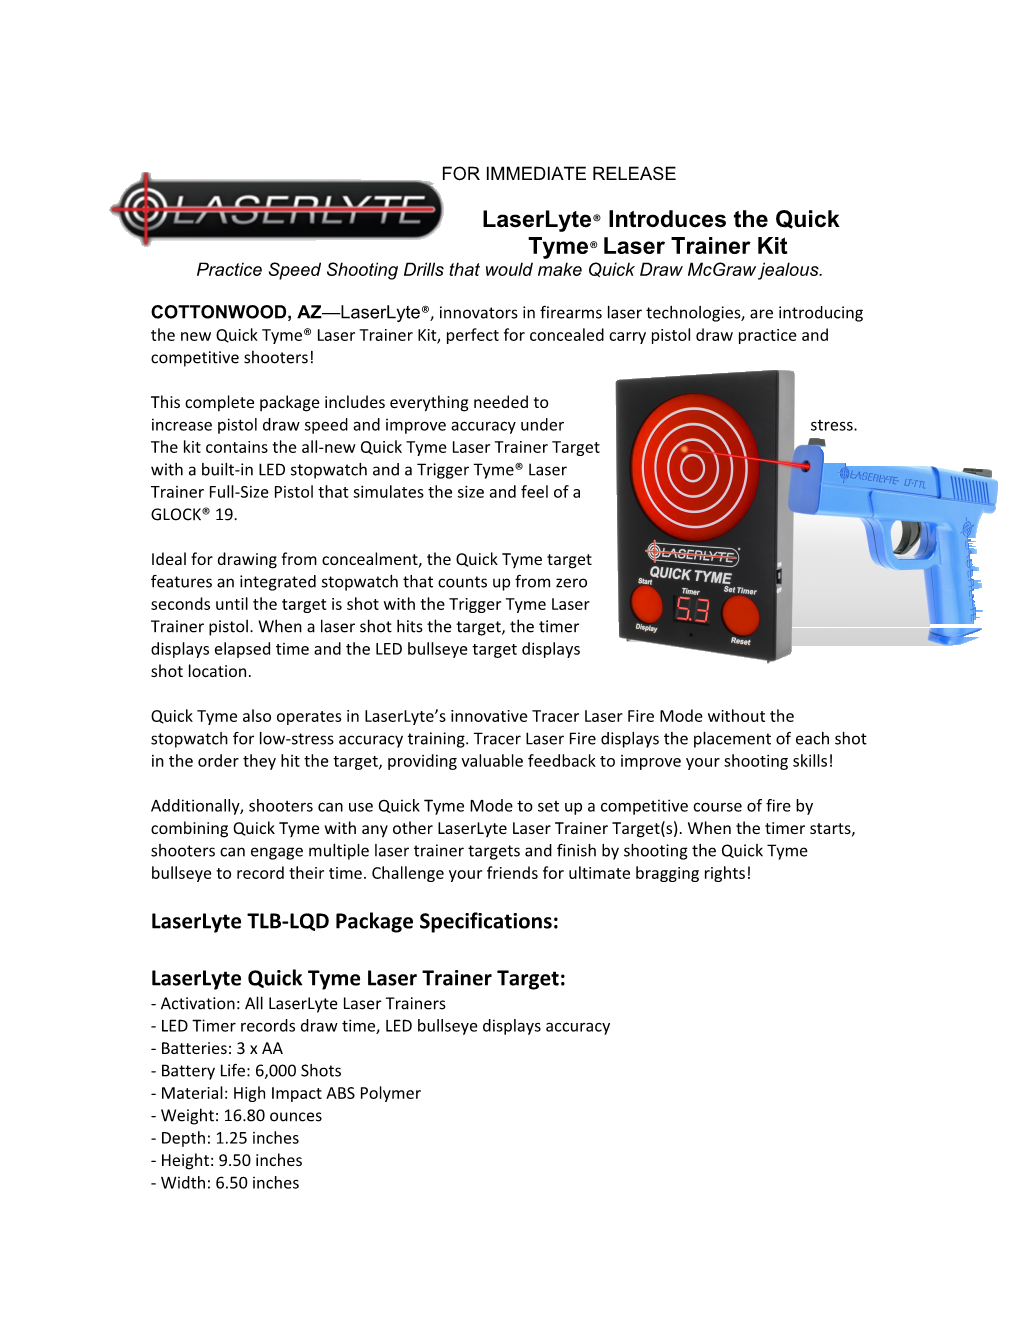 Laserlyte Introduces the Quick Tyme Laser Trainer Kit